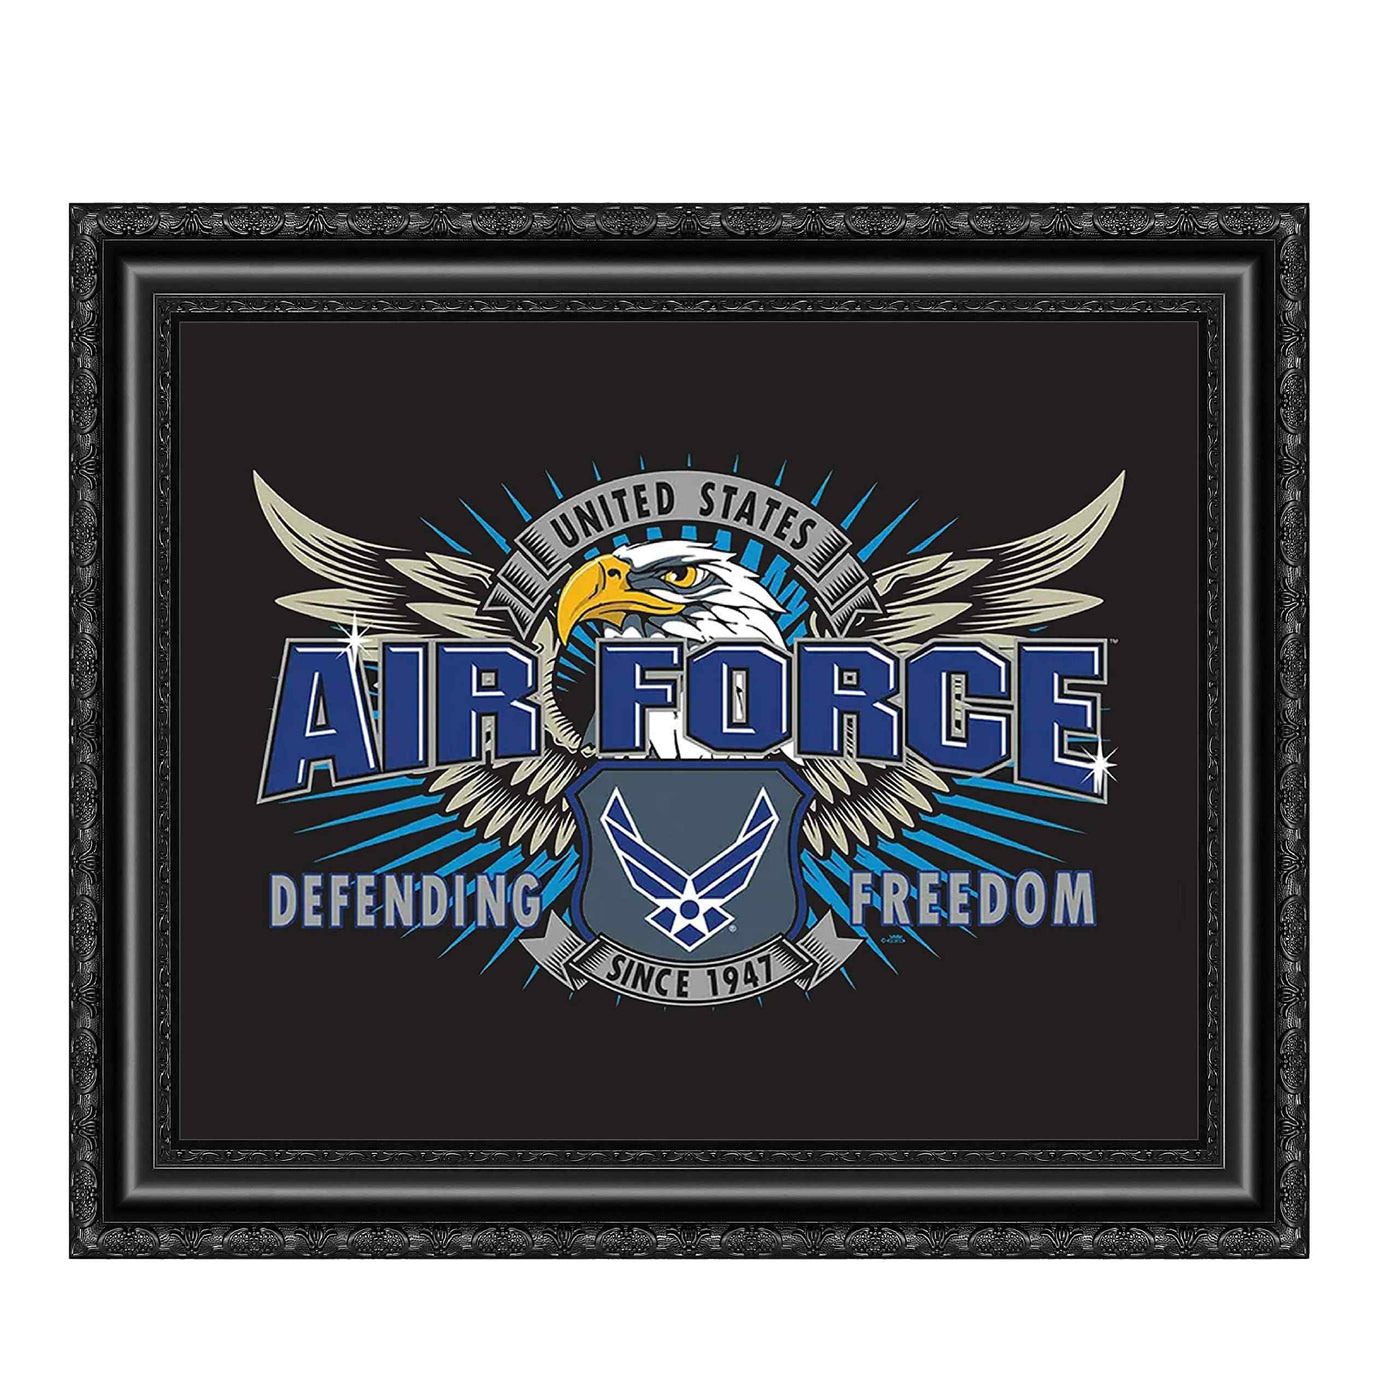 U.S. Air Force Emblem Poster Print- 10 x 8"- USAF Airmen's Wall Art Prints-Ready To Frame."Defending Freedom Since 1947". Home-Office-Garage-Military Decor. Great Gift to Show Air Force Pride!